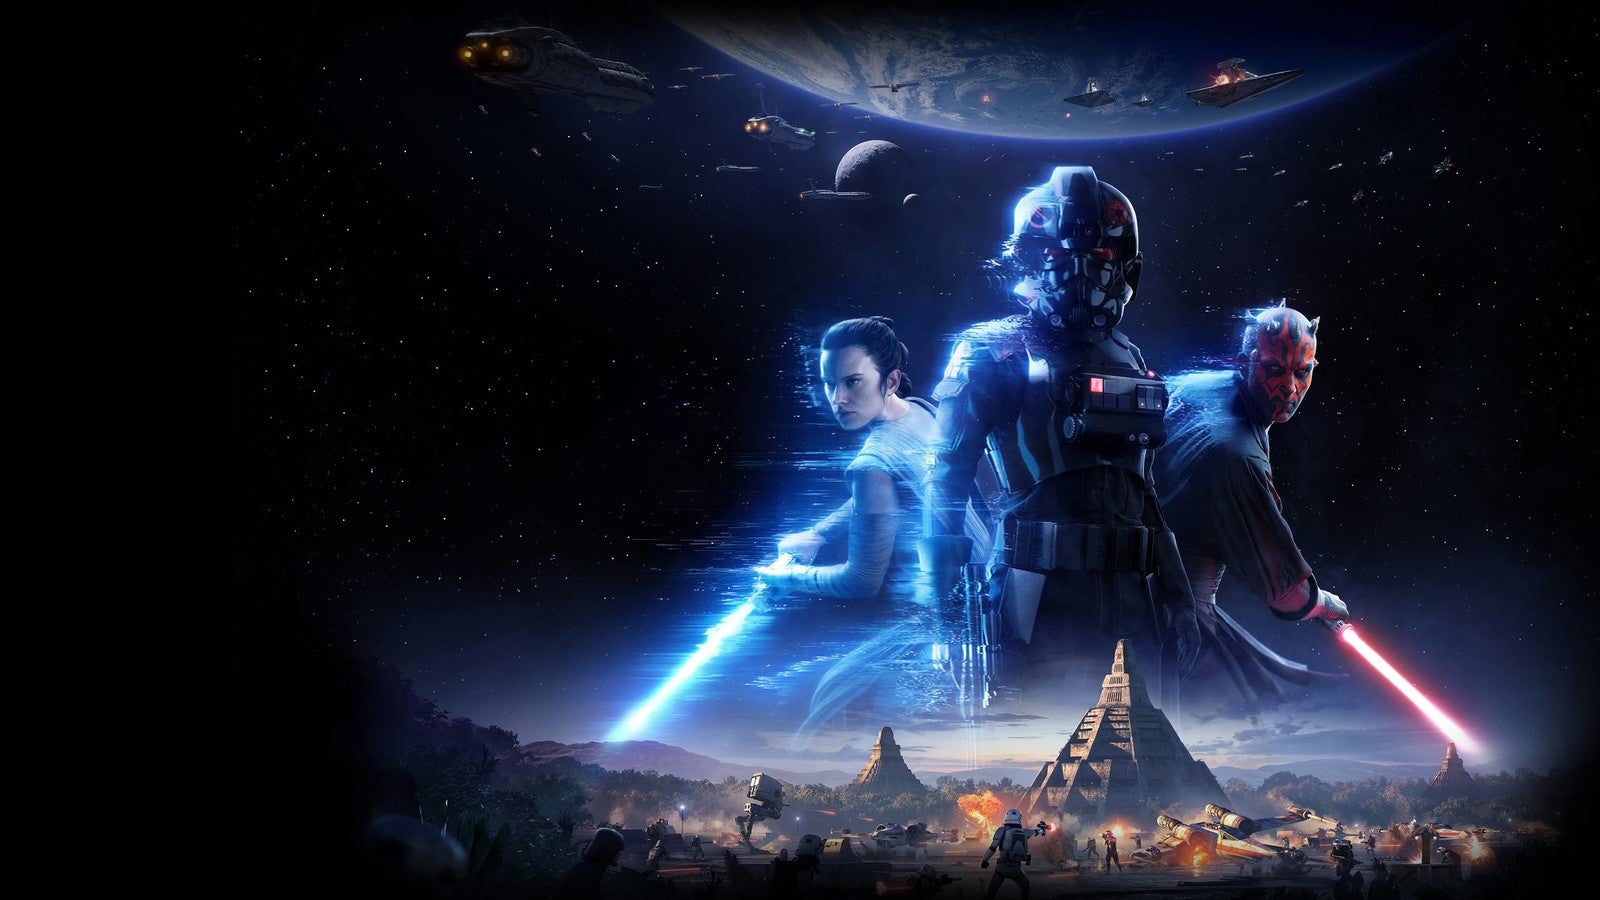 Image for Disney praises “good relationship” with EA and Star Wars games